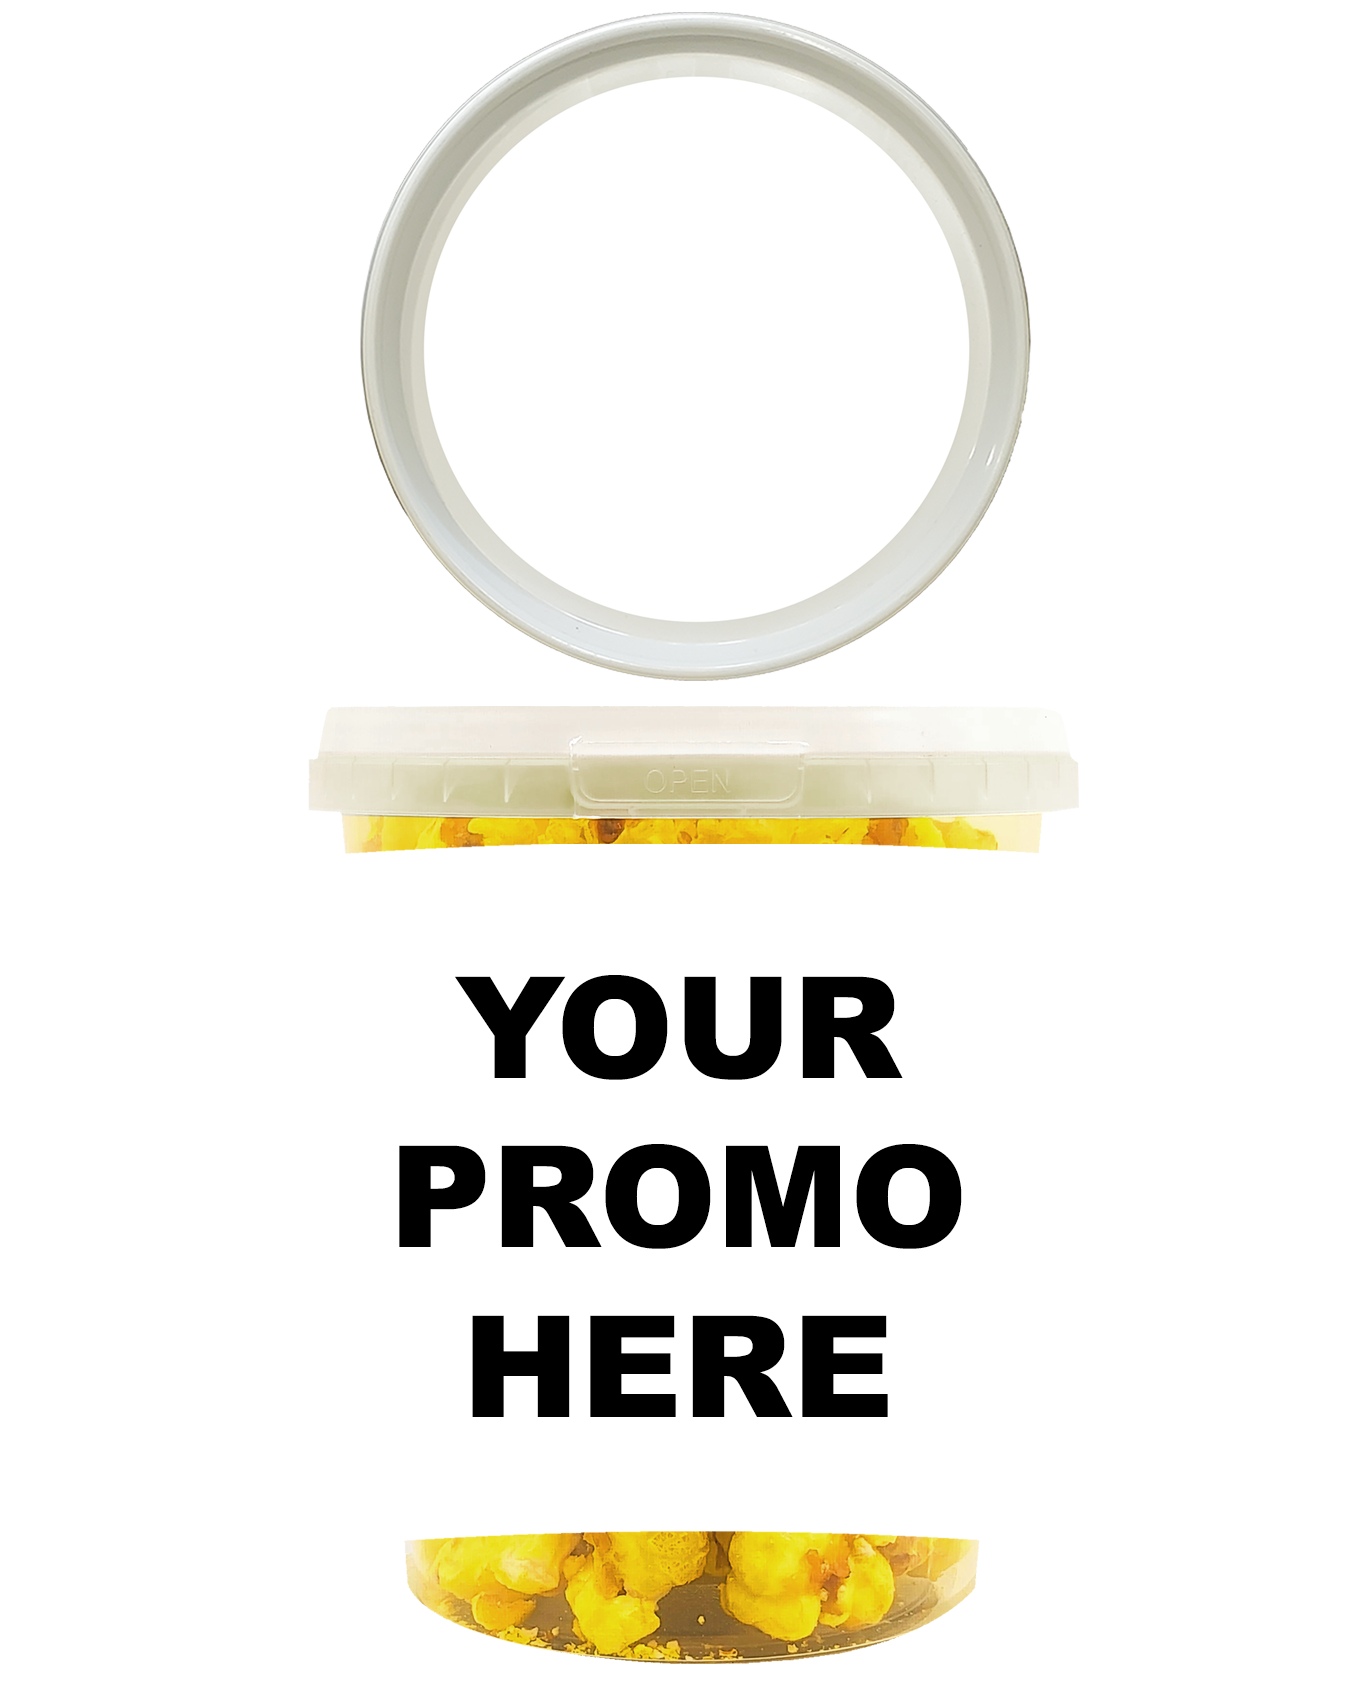 Promo Pop™ - Lively Lemon Classic (as low as $4.99 per bucket) Case of 12 Price